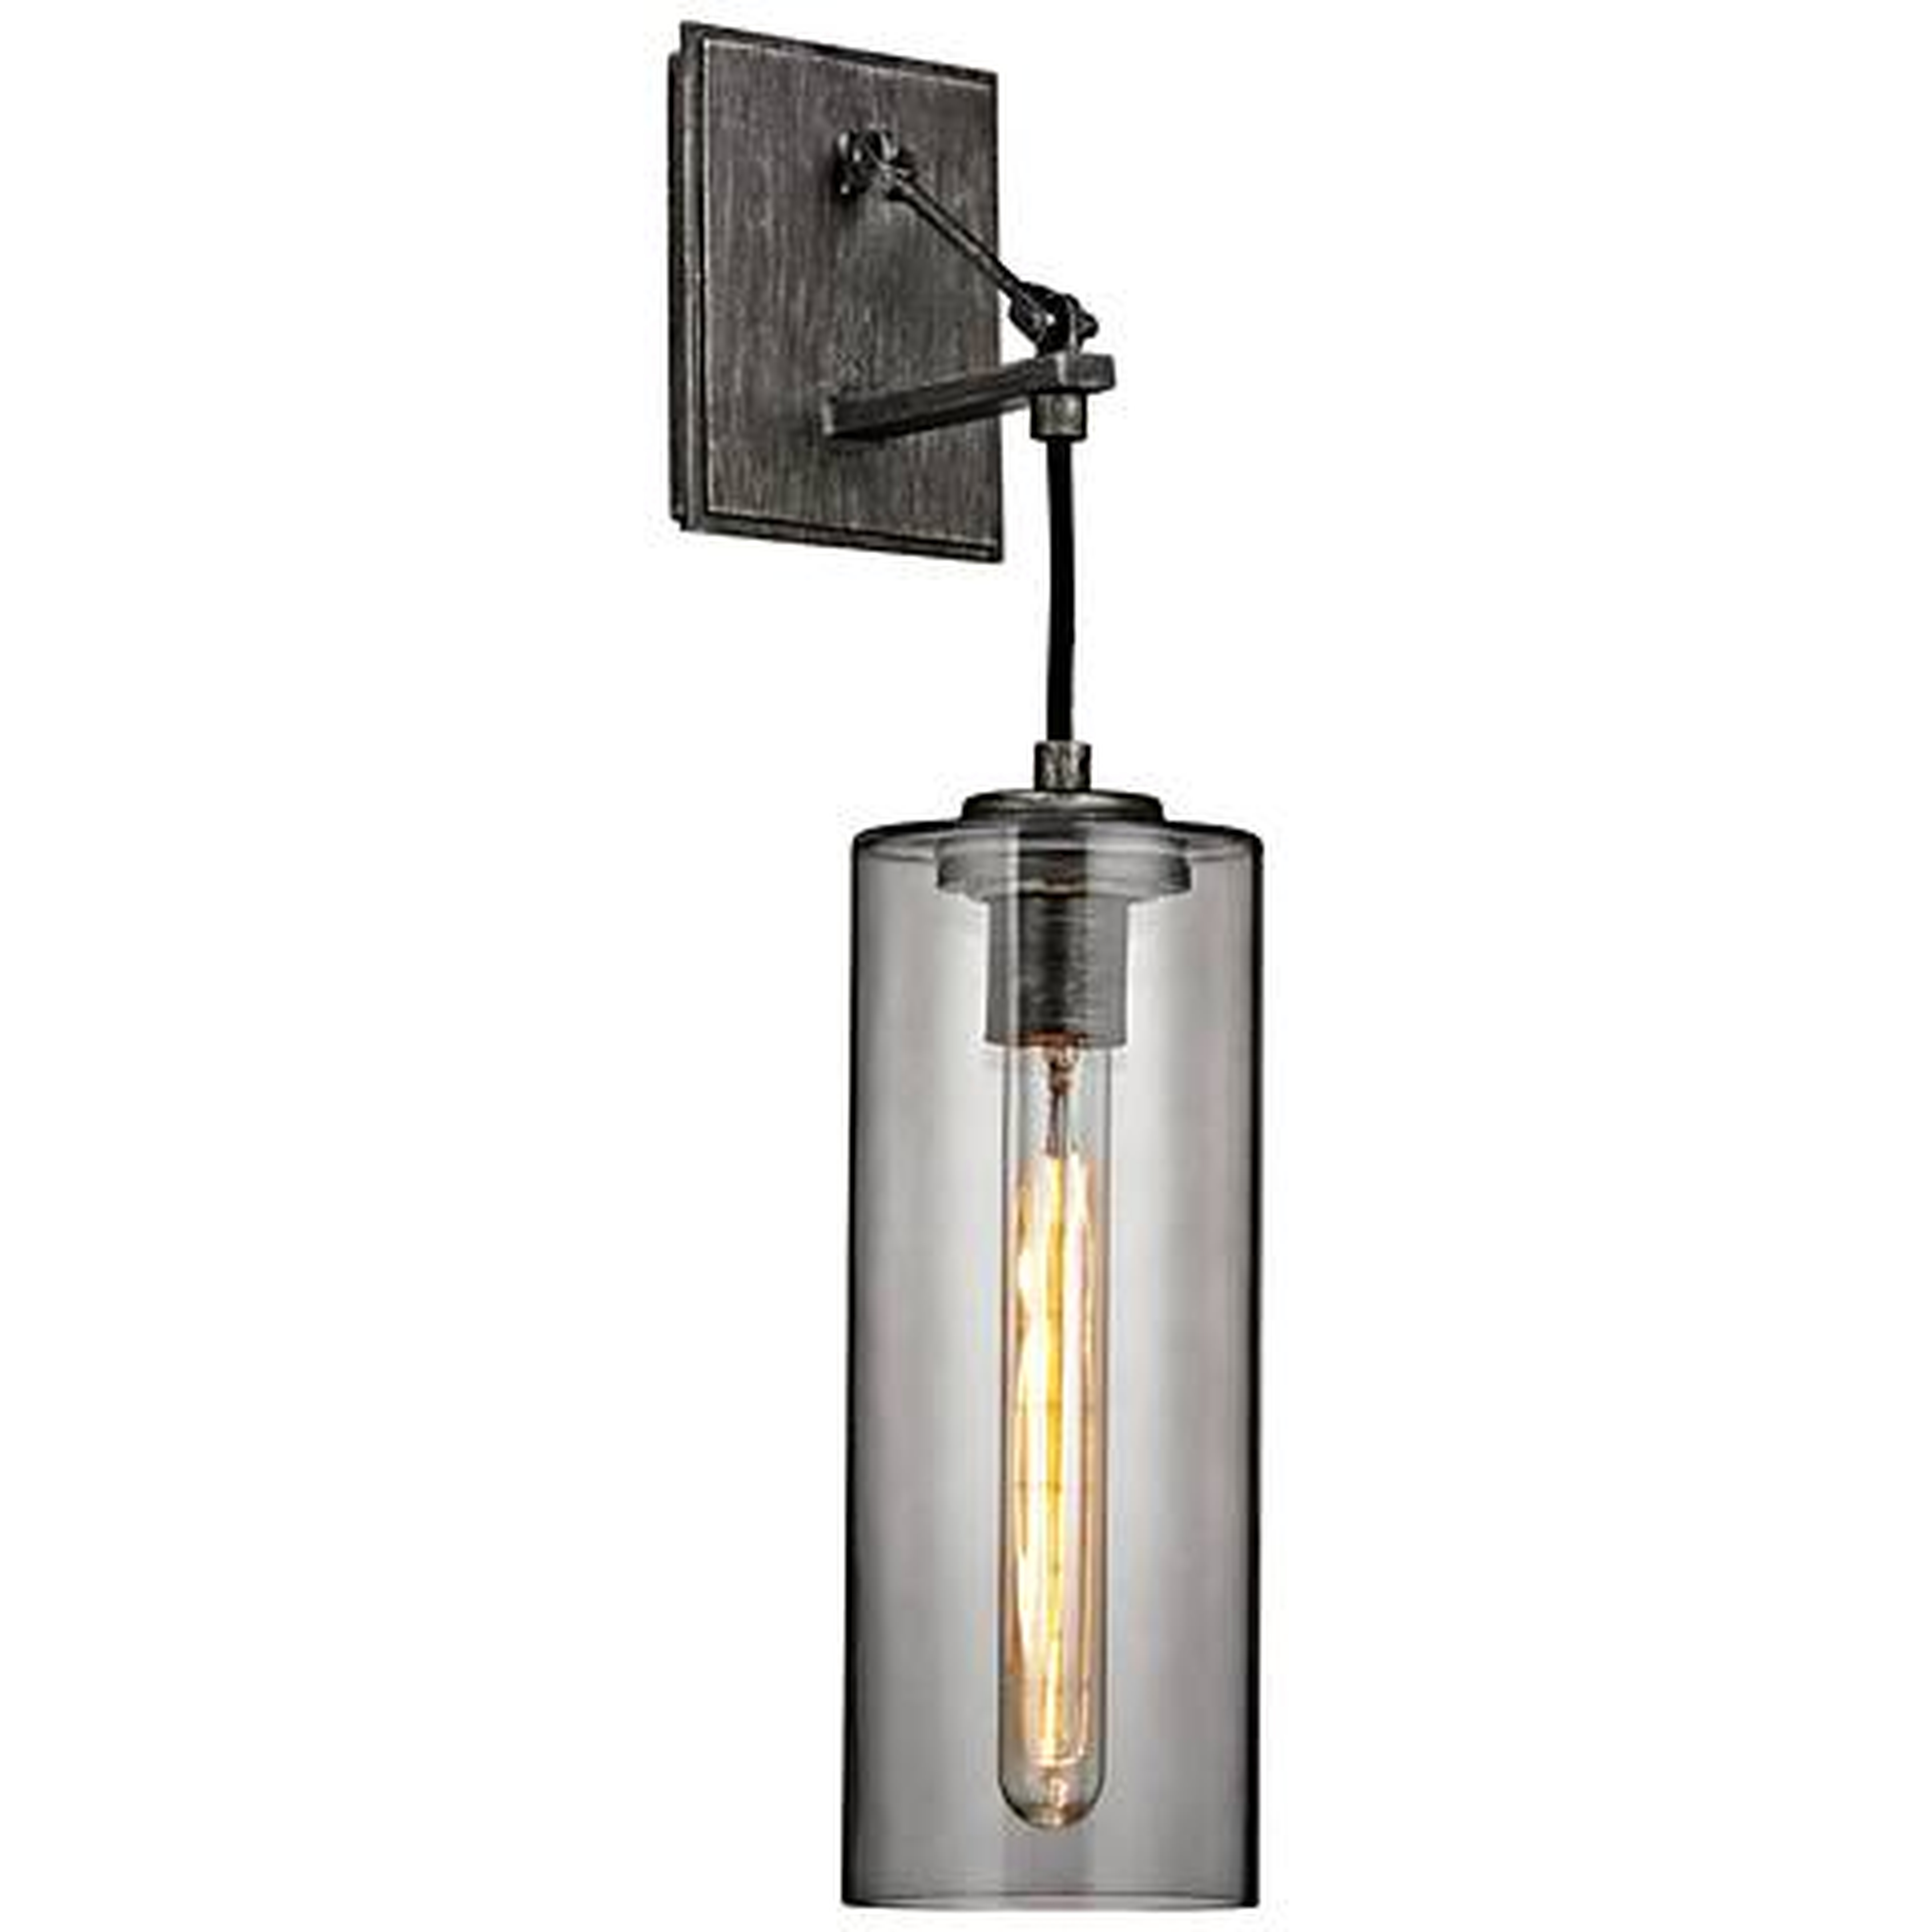 Union Square 20 3/4" High Graphite Wall Sconce - Lamps Plus